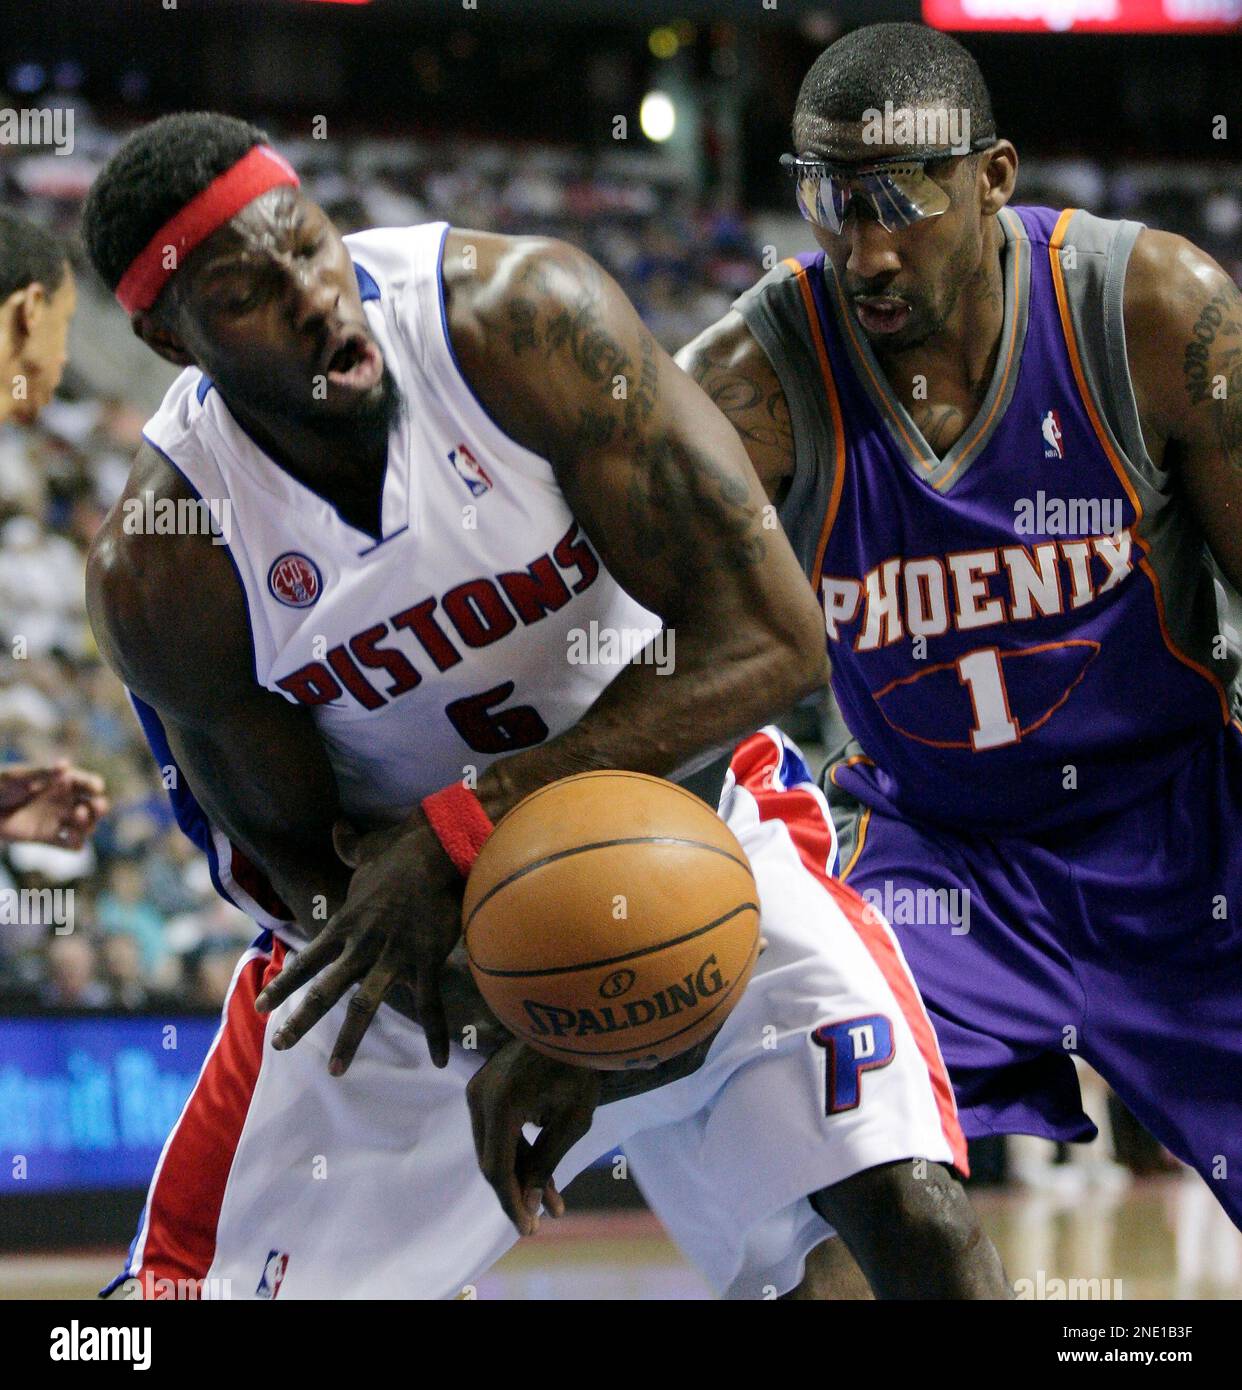 Ben Wallace Discusses Cliff Robinson's Legacy in Detroit